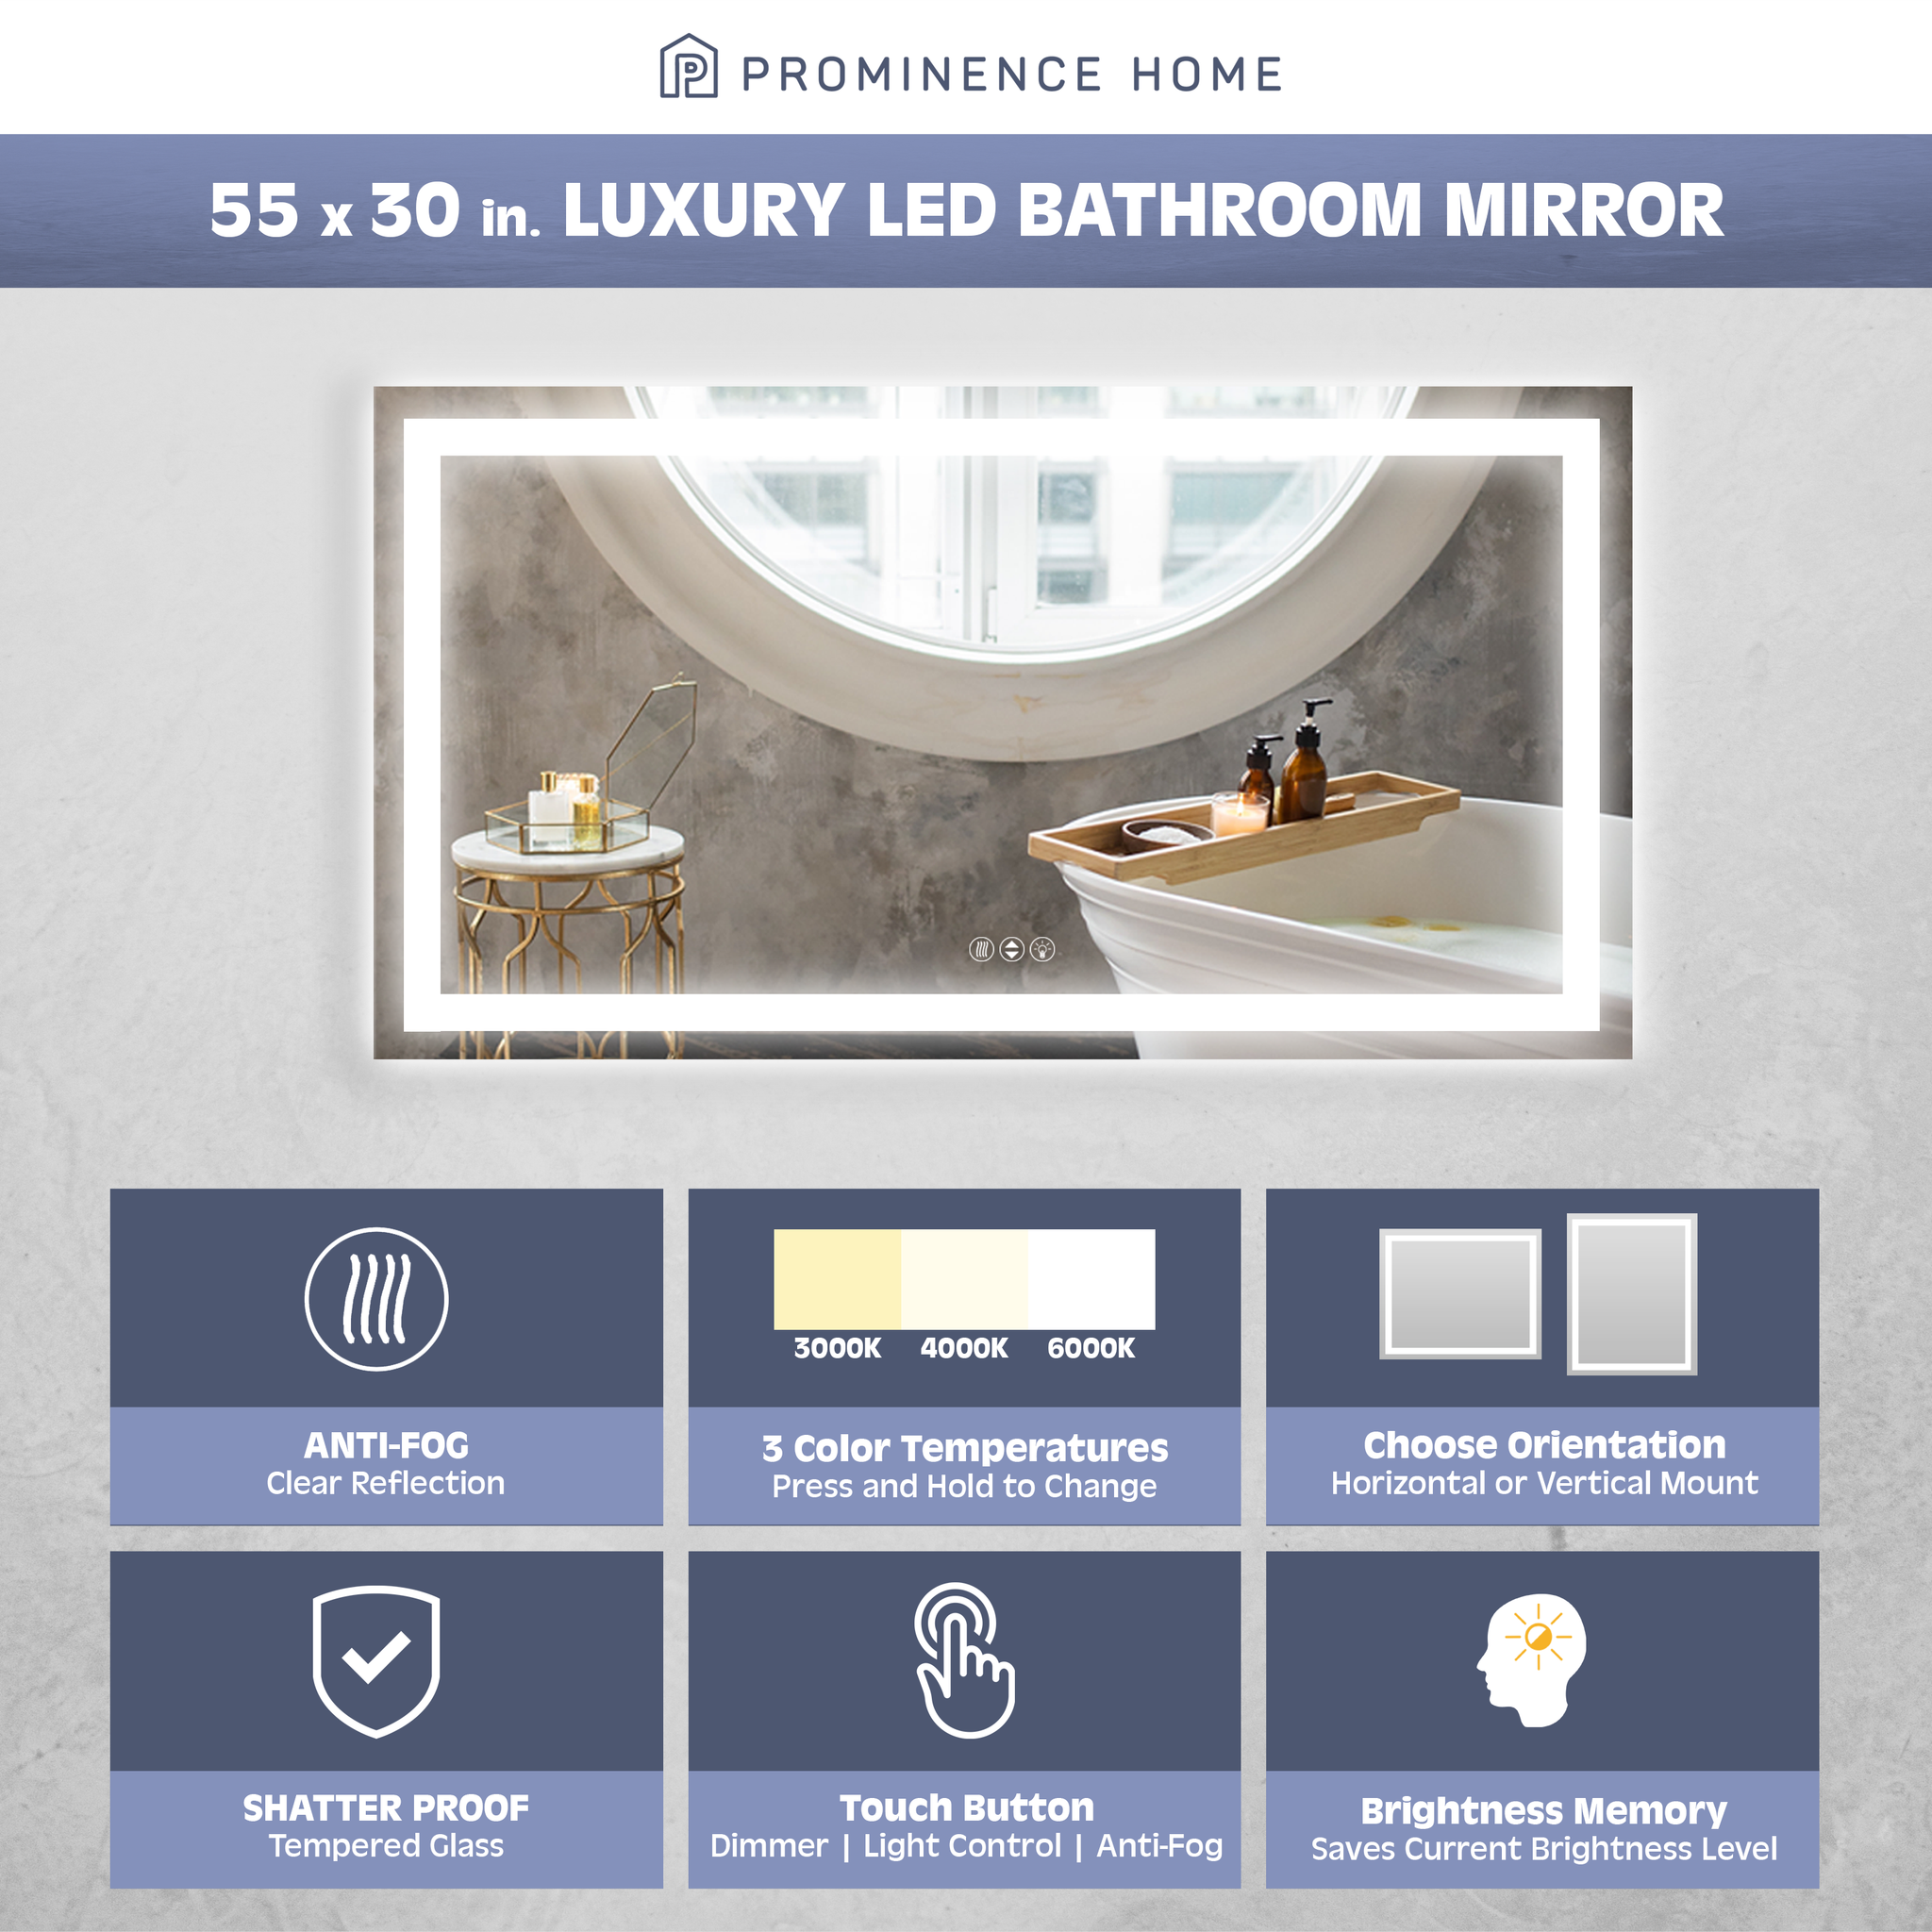 Luxury LED Bathroom/Wall Mirror with Front and Back Light, Anti Fog, Shatter Resistant and Adjustable Light Settings, 55 in x 30 in by Prominence Home